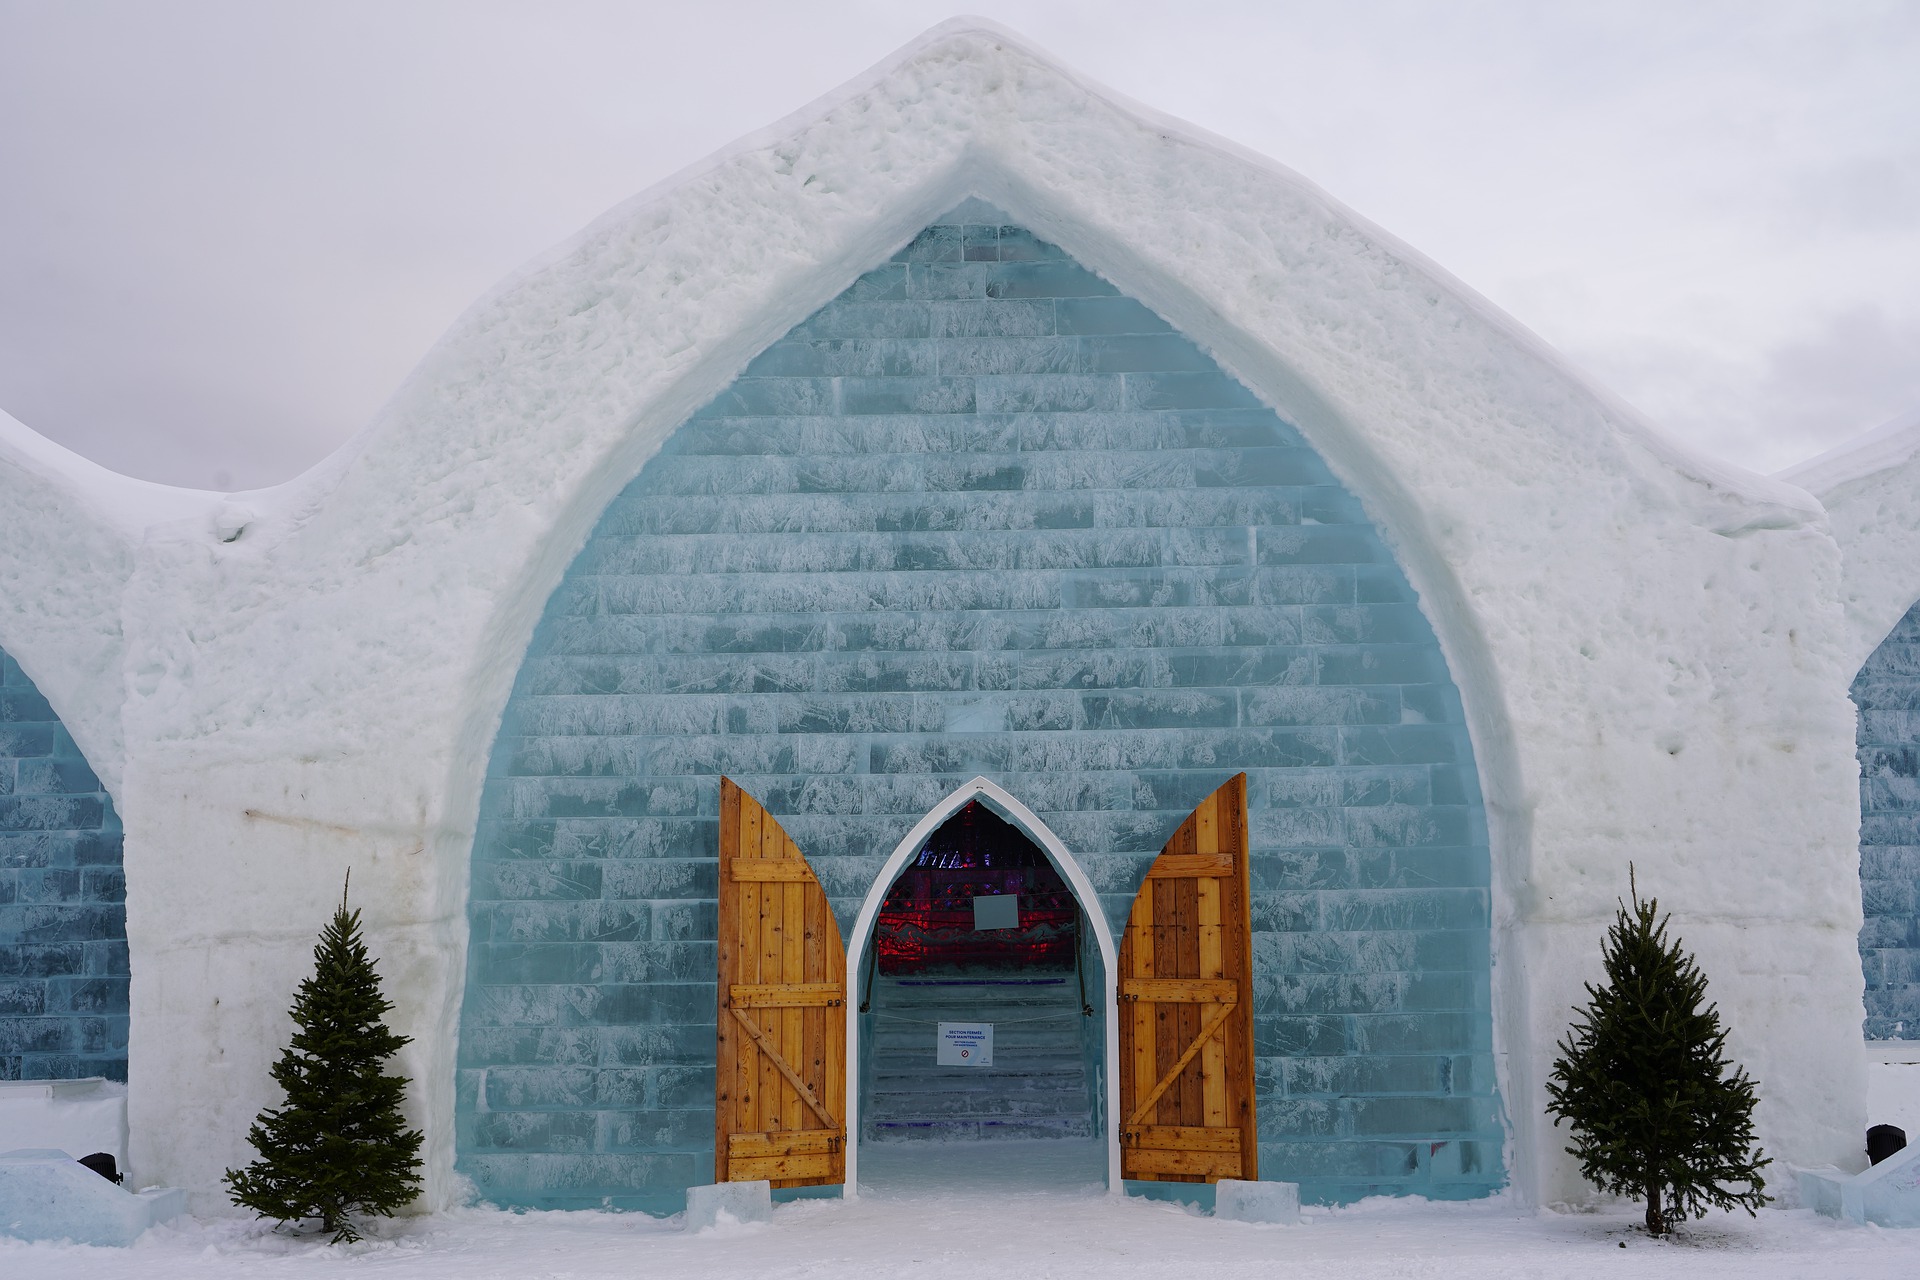 A hotel entrance made out of ice and snow